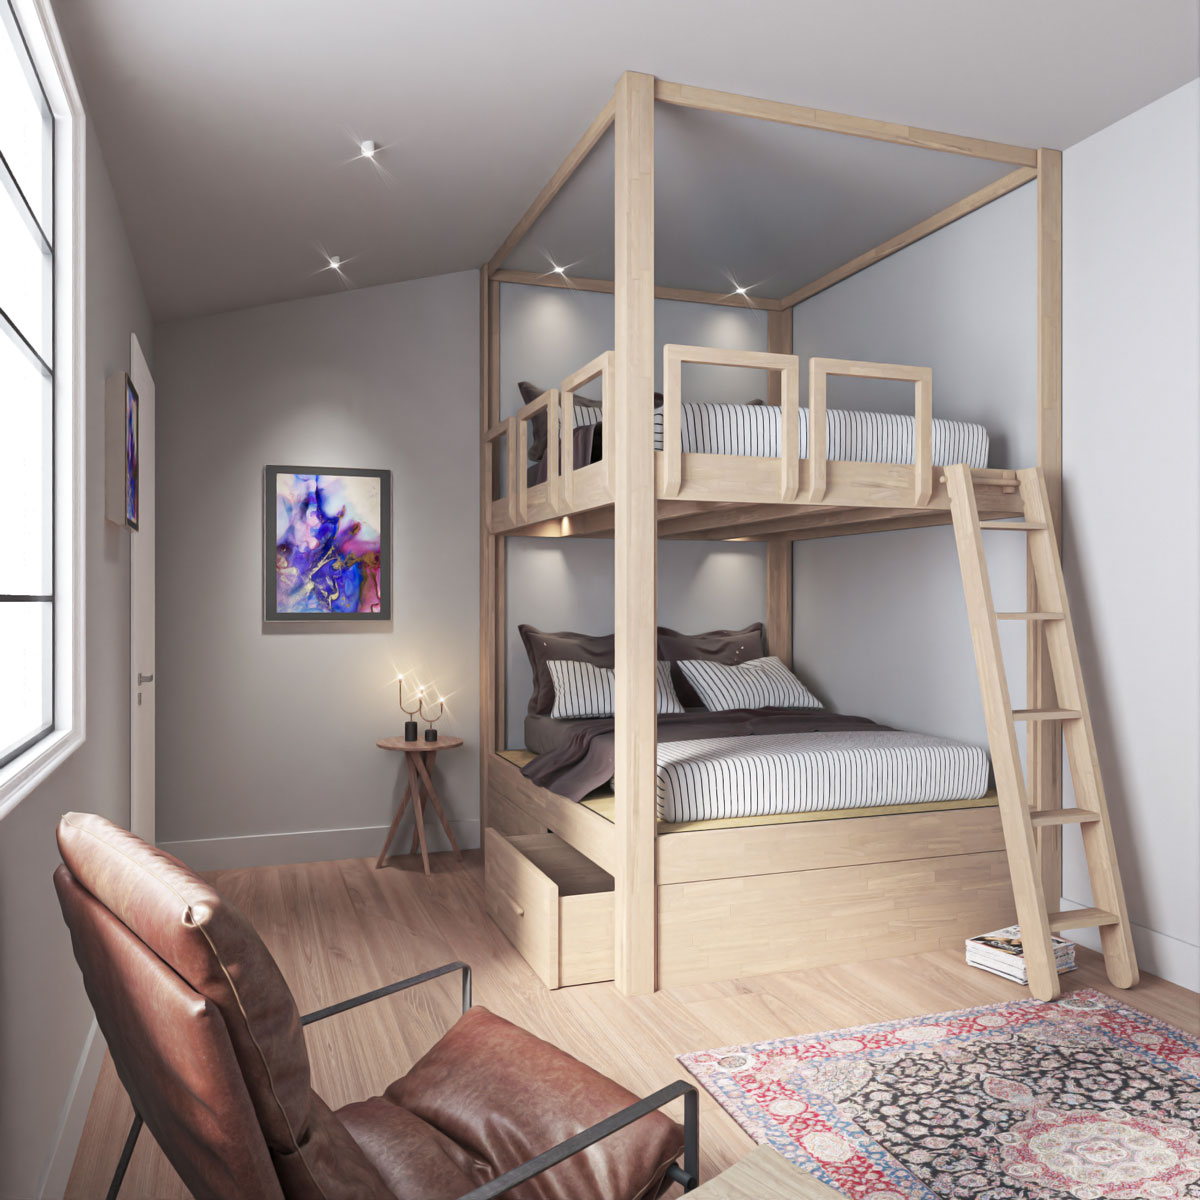 Yen-E Queen Bunk Bed - pull-out bed underneath - Stepladder